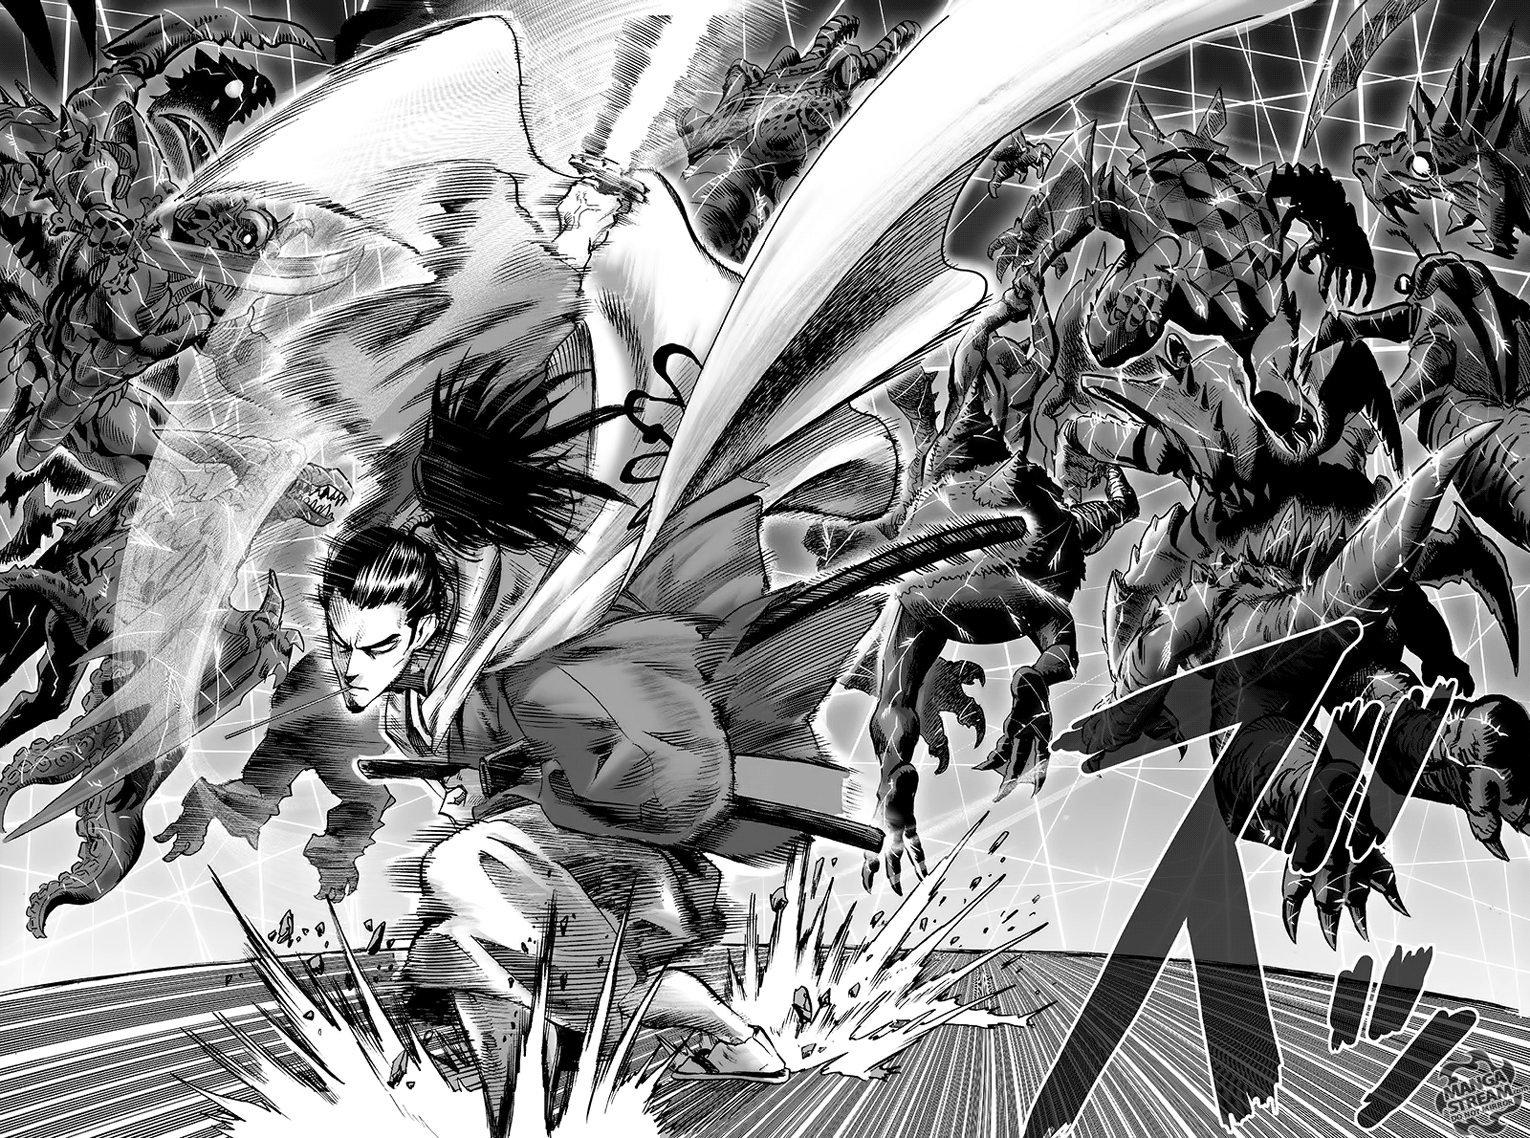 One Punch Man, Chapter 94 - I See image 124